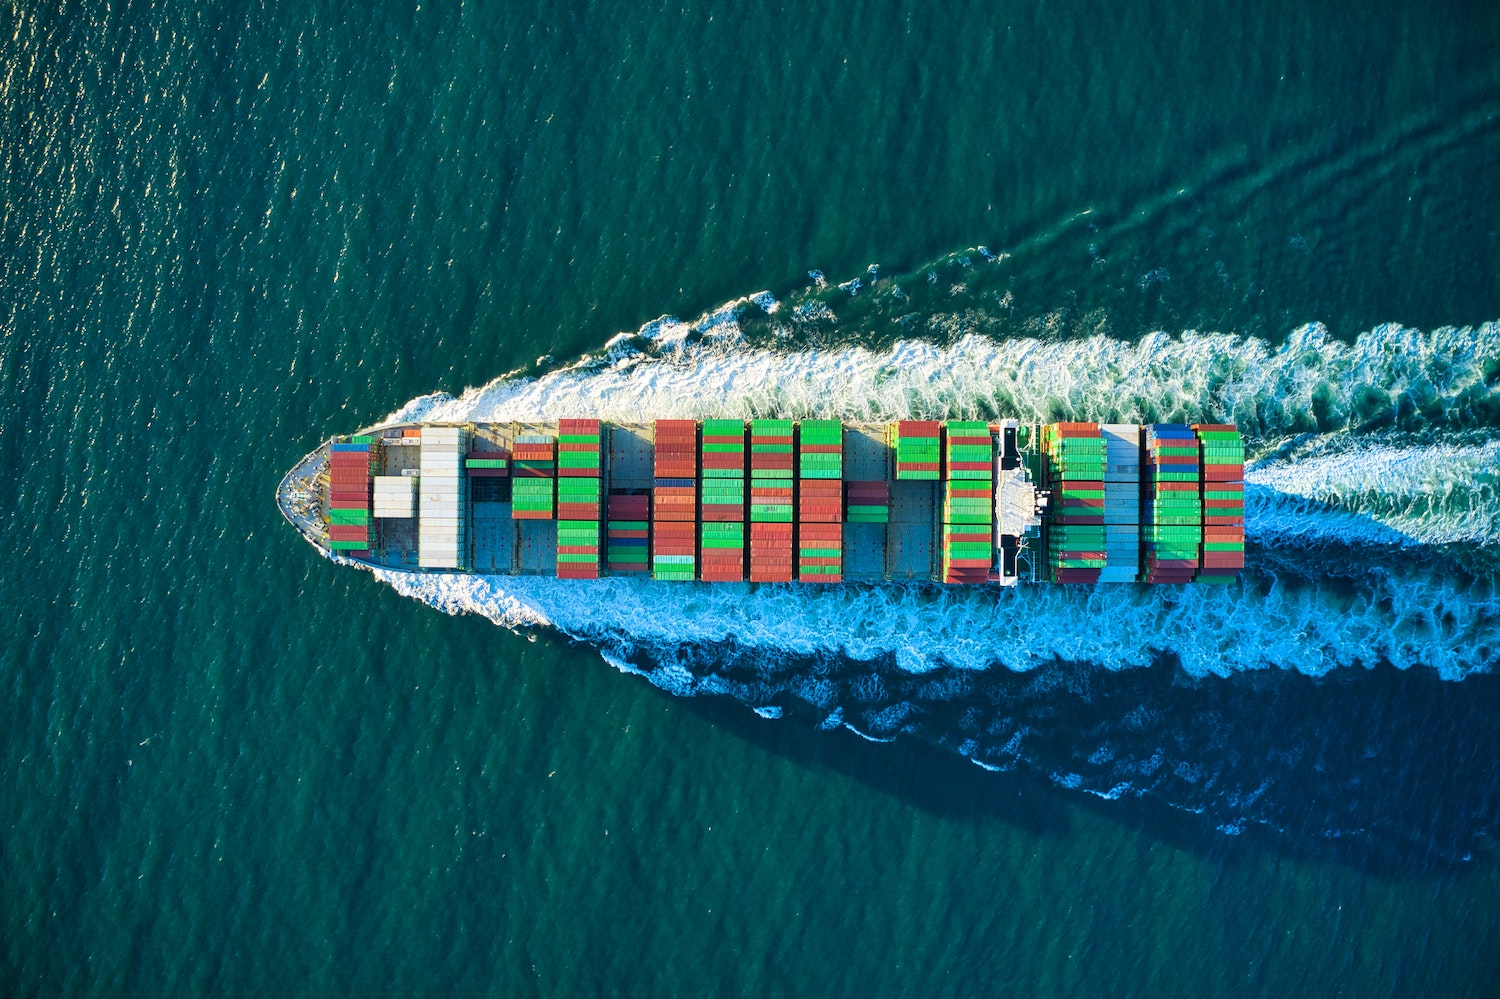 aerial view of a ship with containers